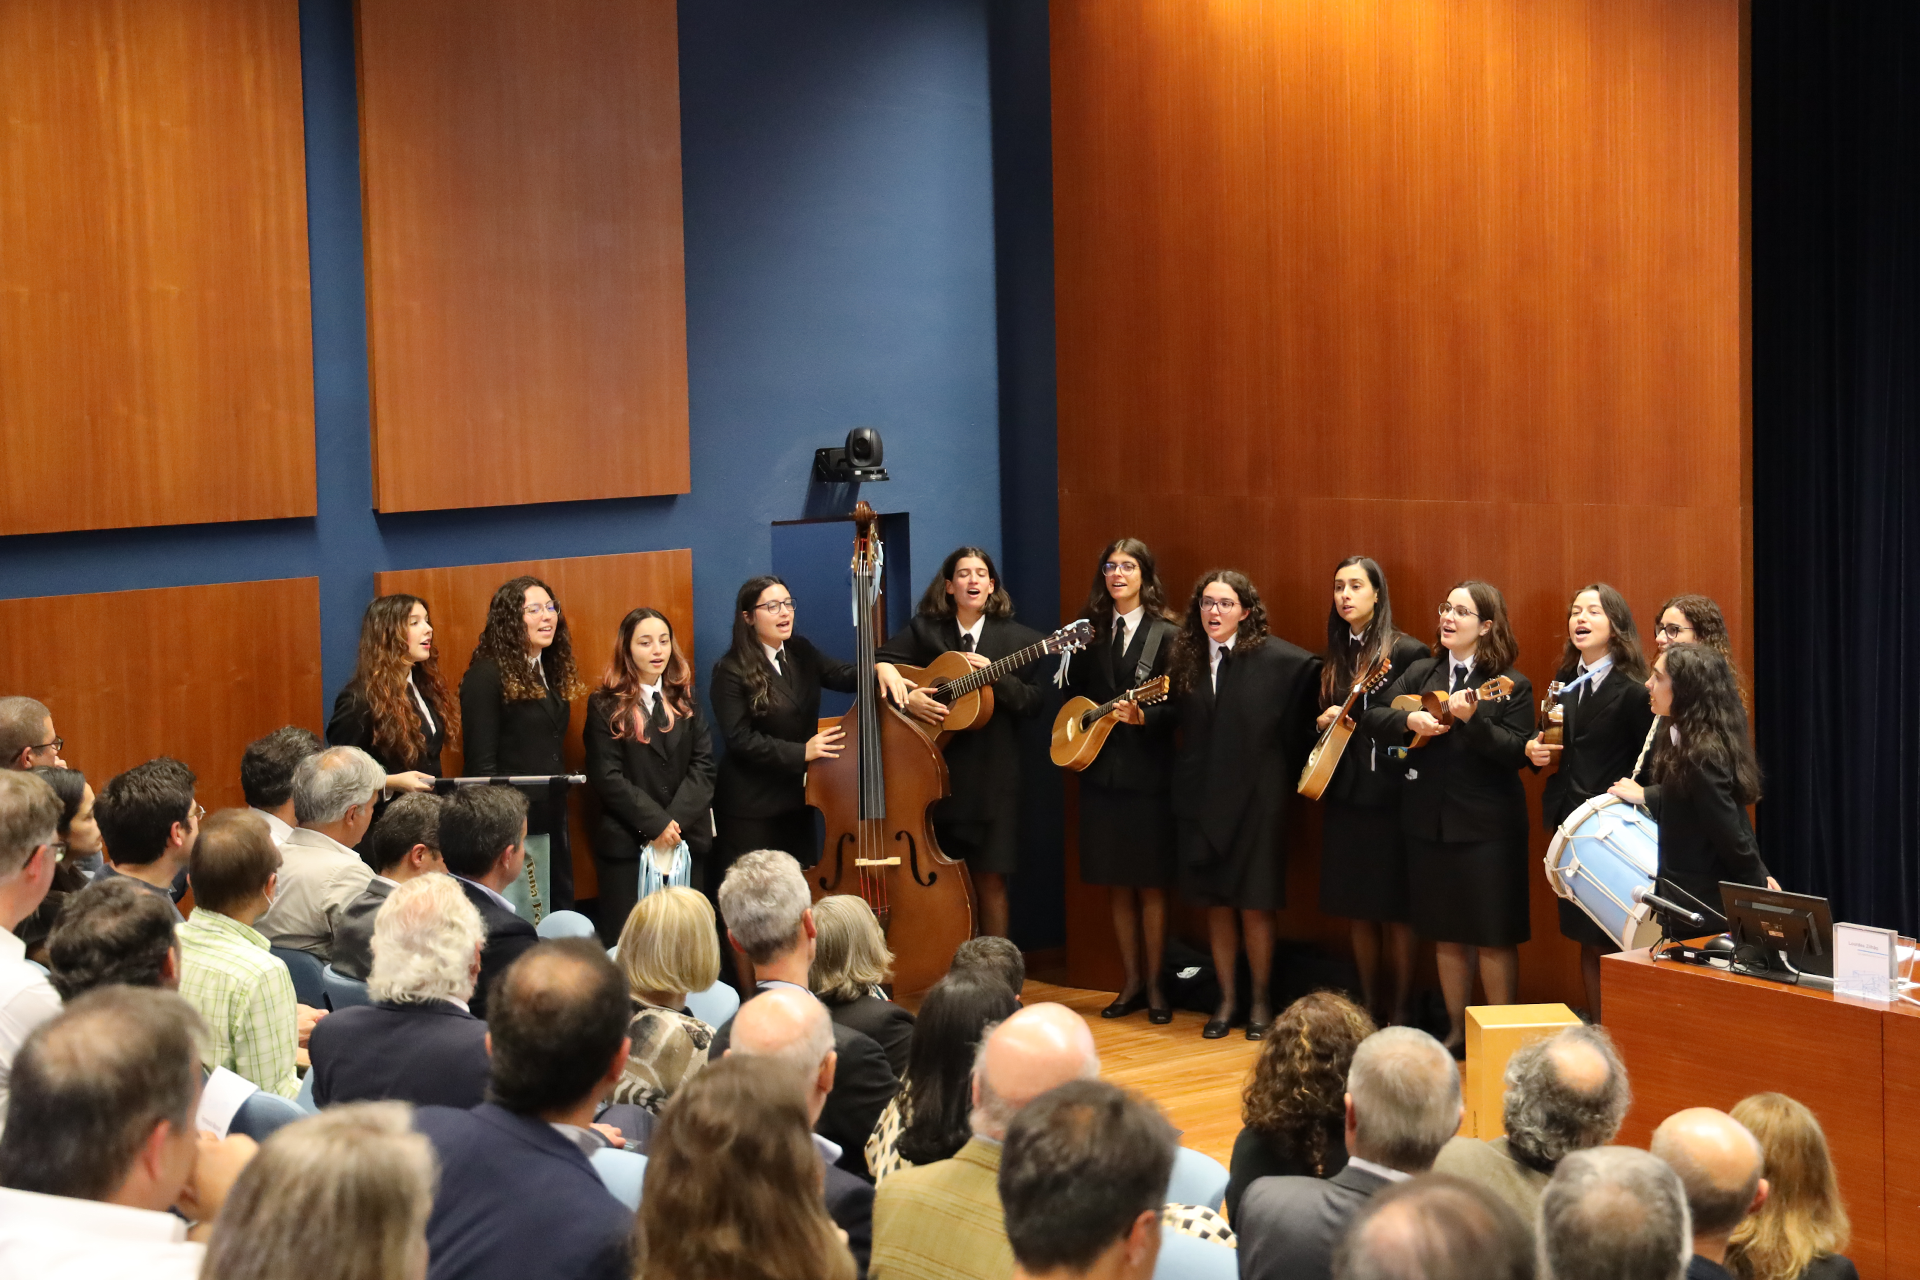 Musical performance by the Women's Tuna of the Faculty of Sciences of the University of Porto